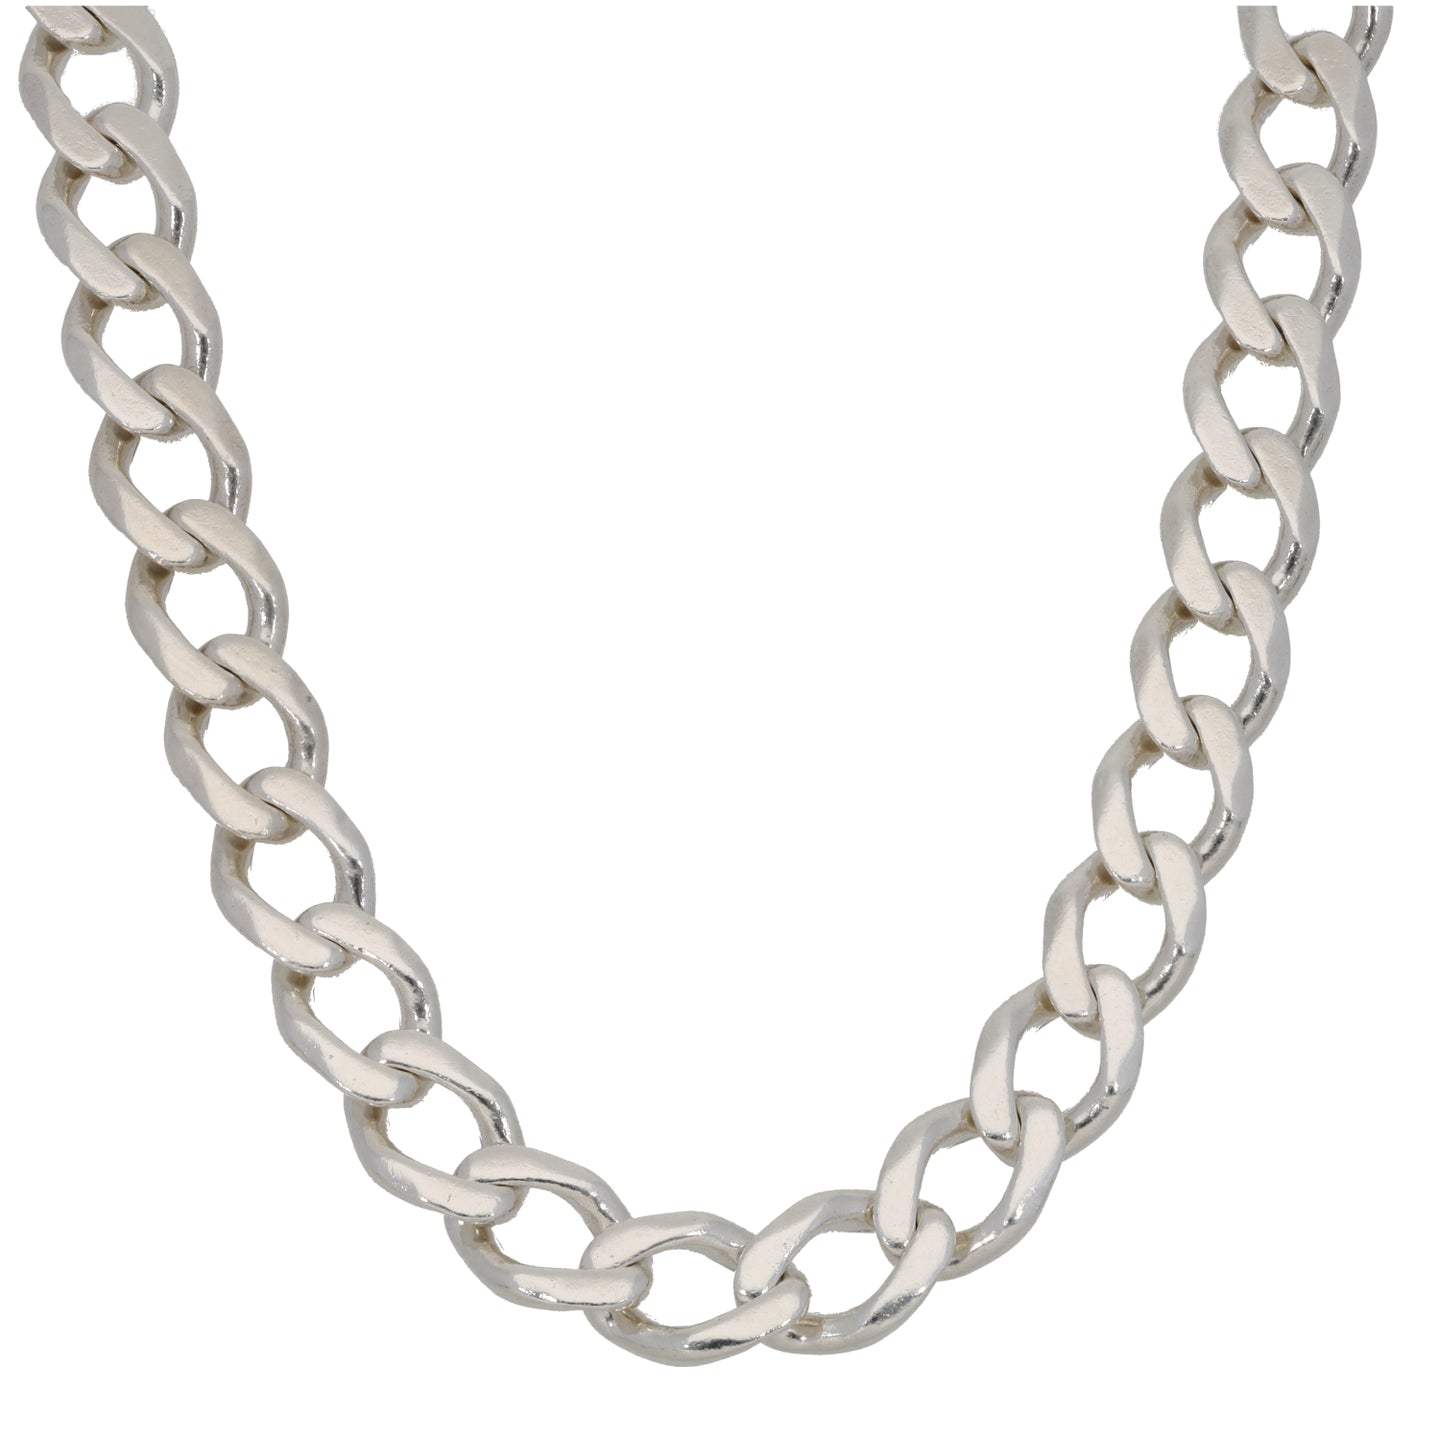 Silver Sterling Curb Chain 22